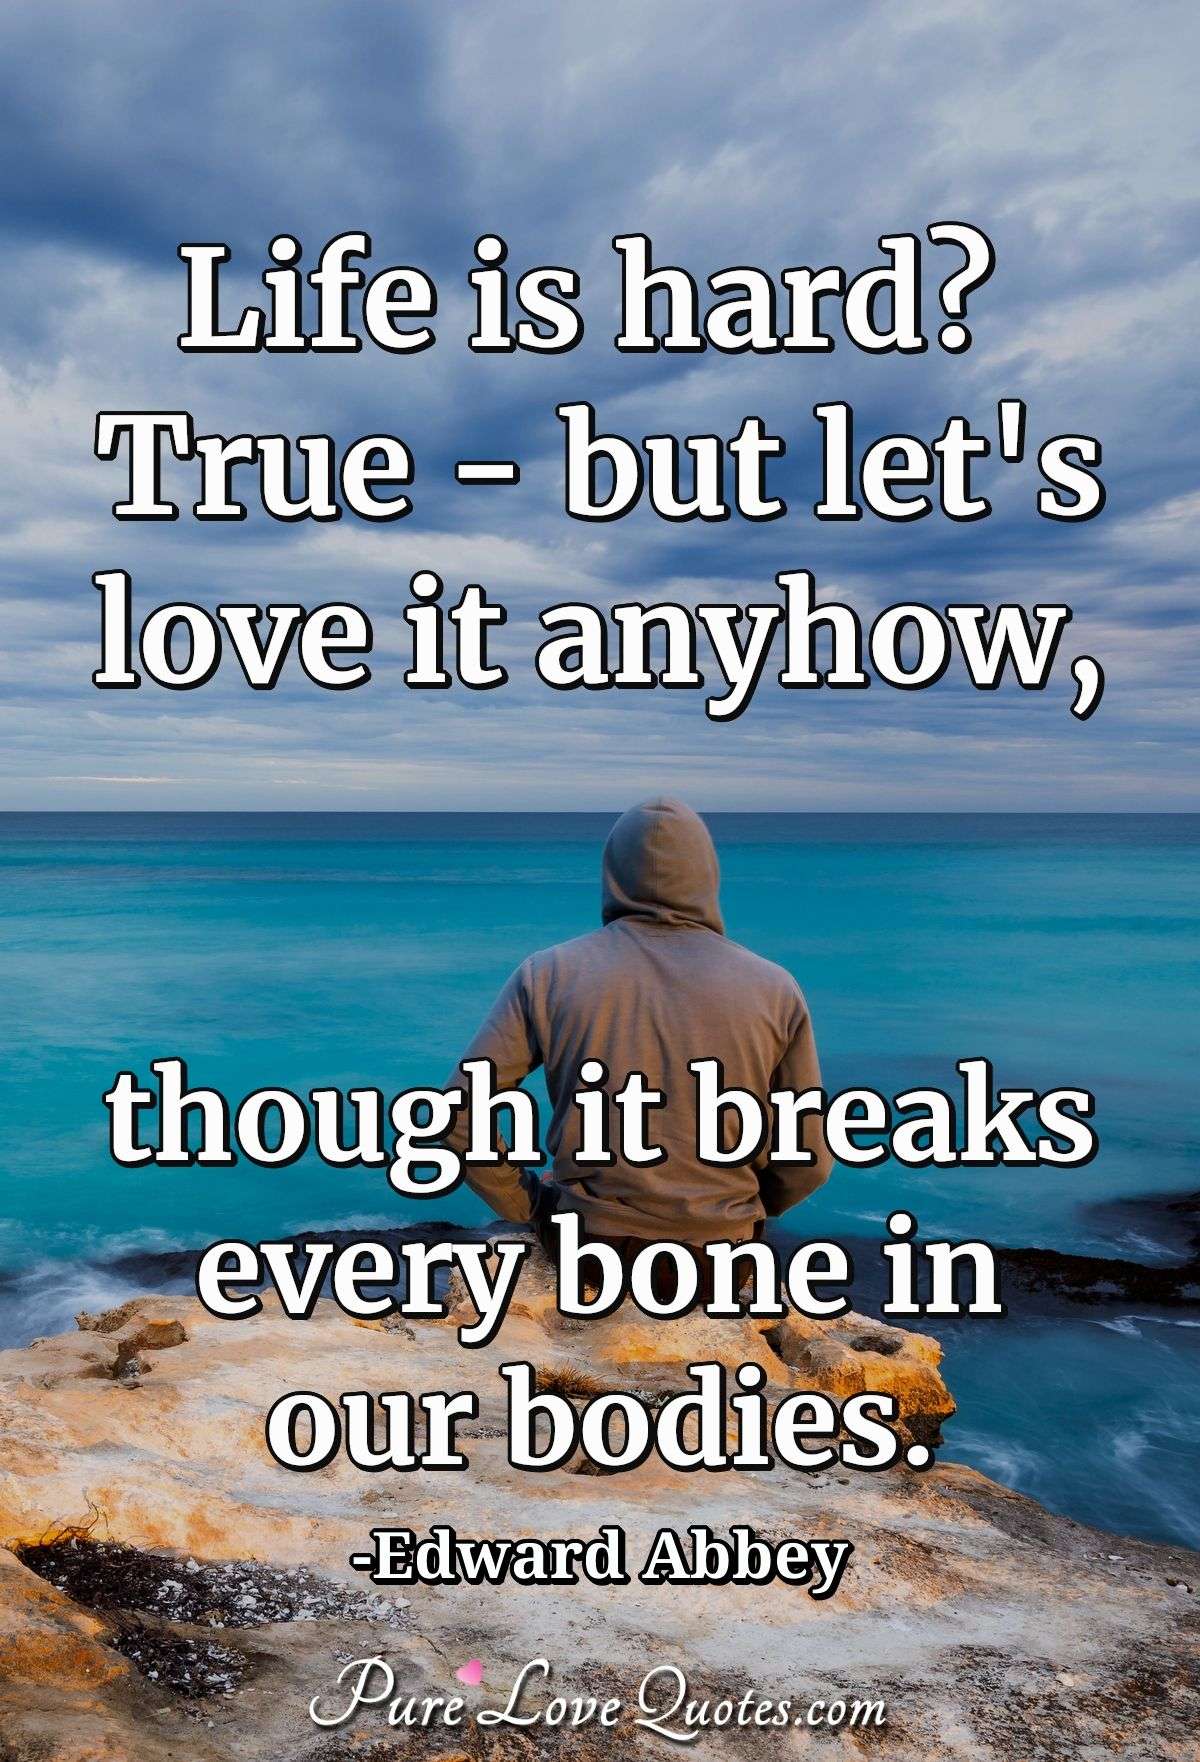 Life is hard? True - but let's love it anyhow, though it breaks every bone in our bodies. - Edward Abbey